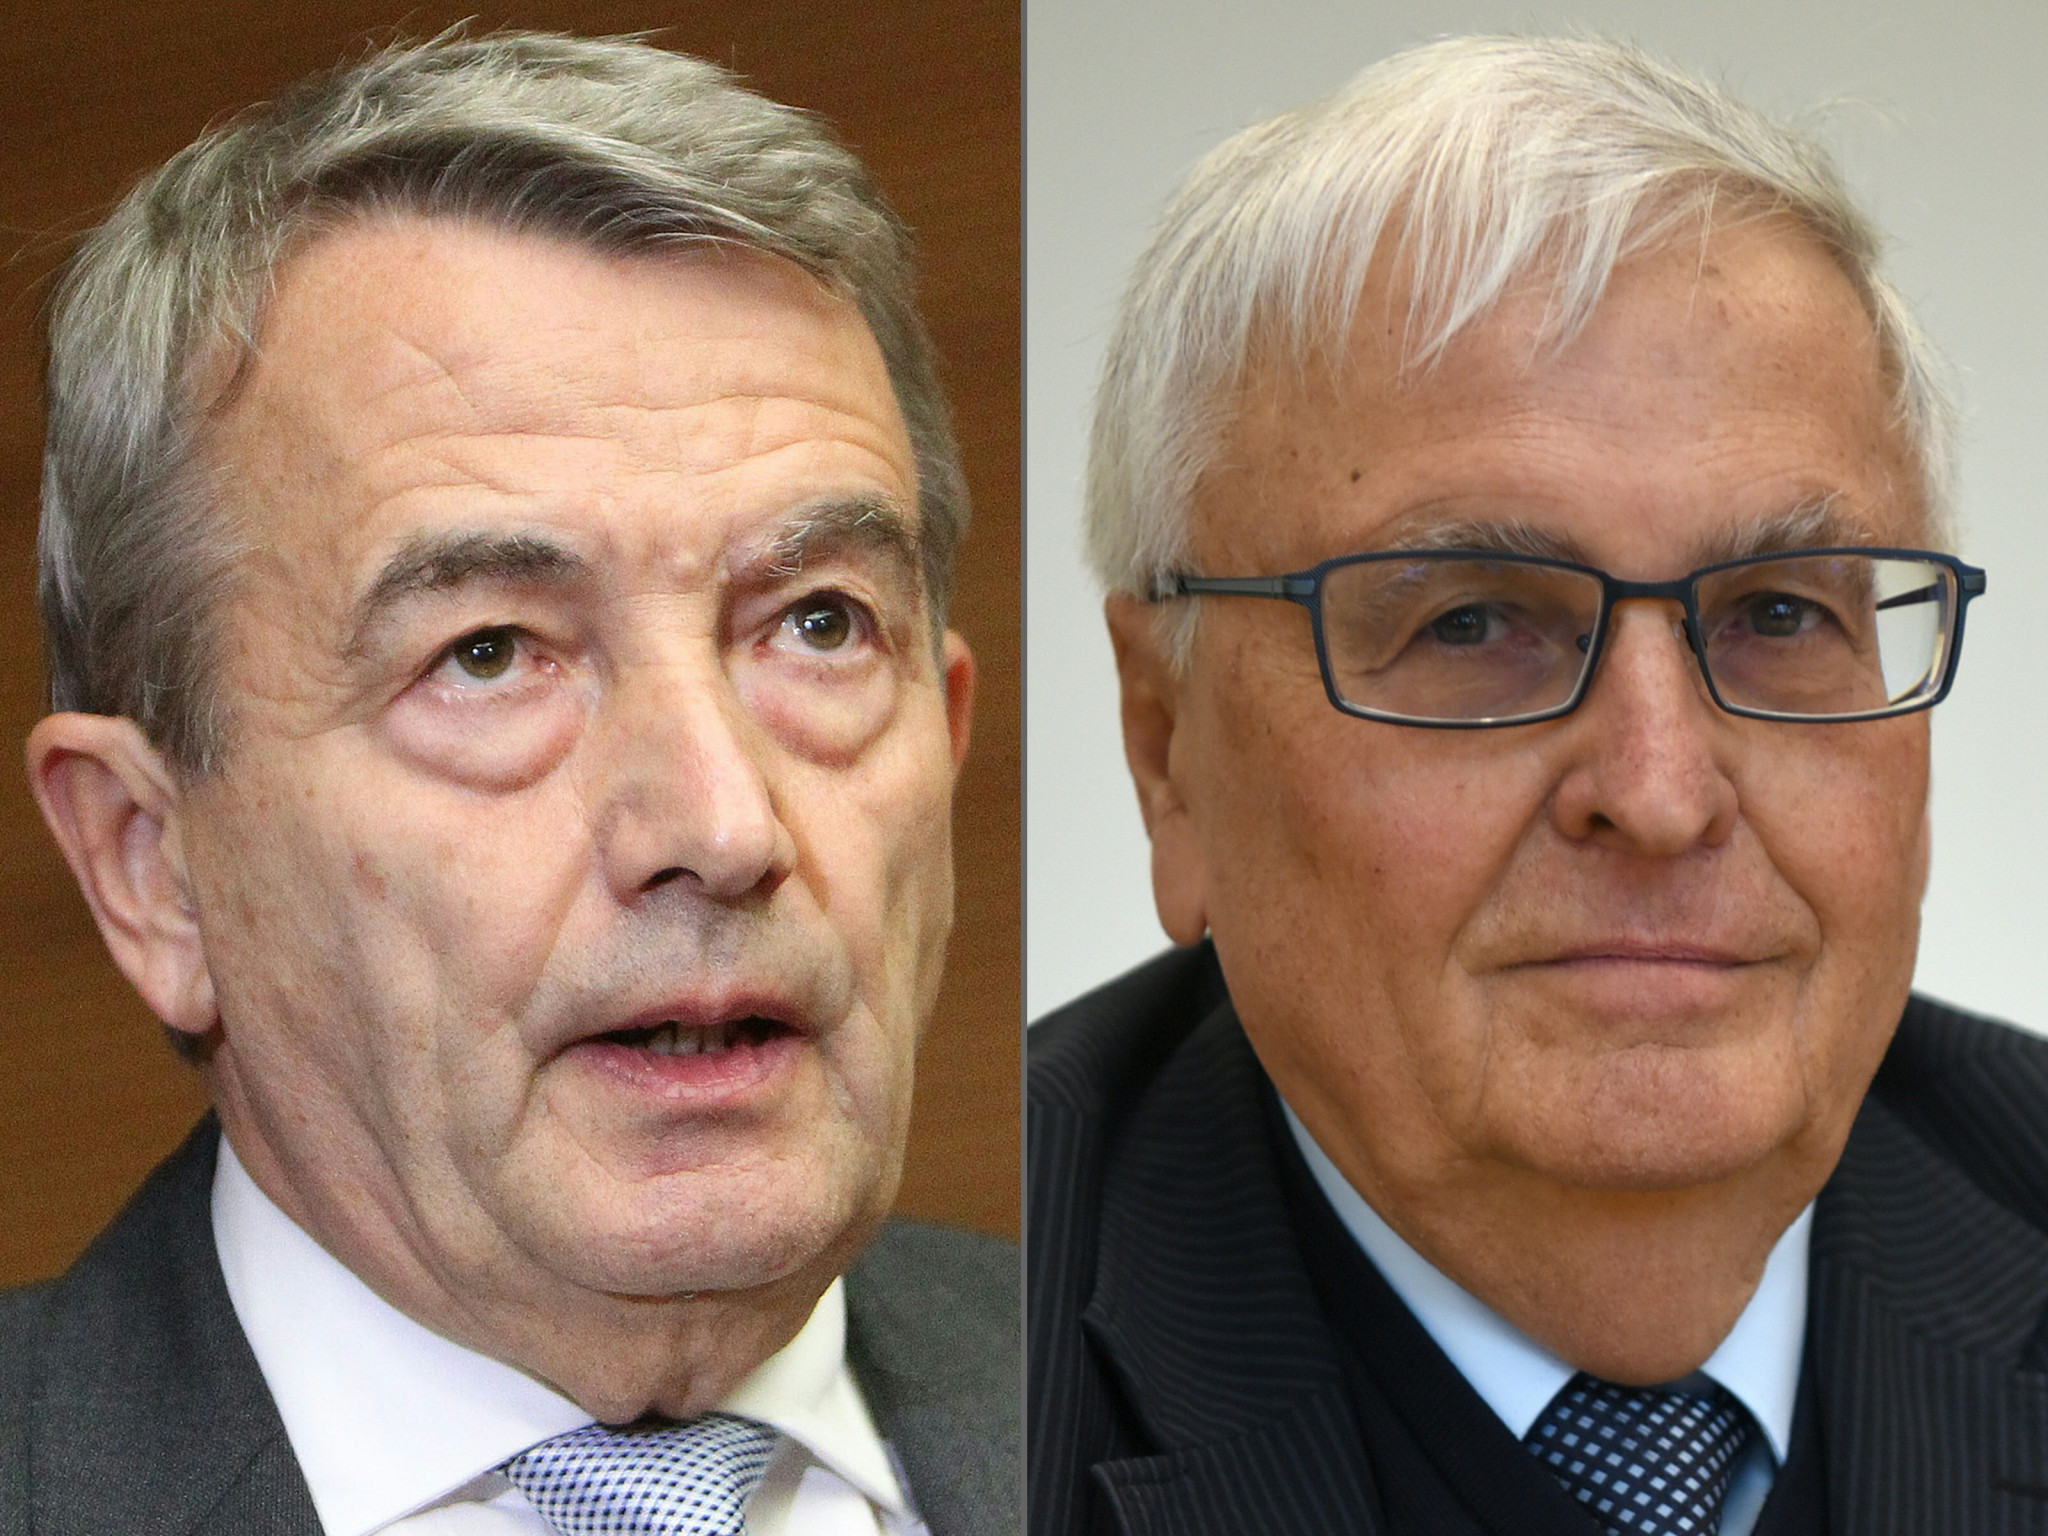 Wolfgang Niersbach, left and Theo Zwanziger, right, are among three high-ranking German officials to be cleared of tax evasion charges ©Getty Images